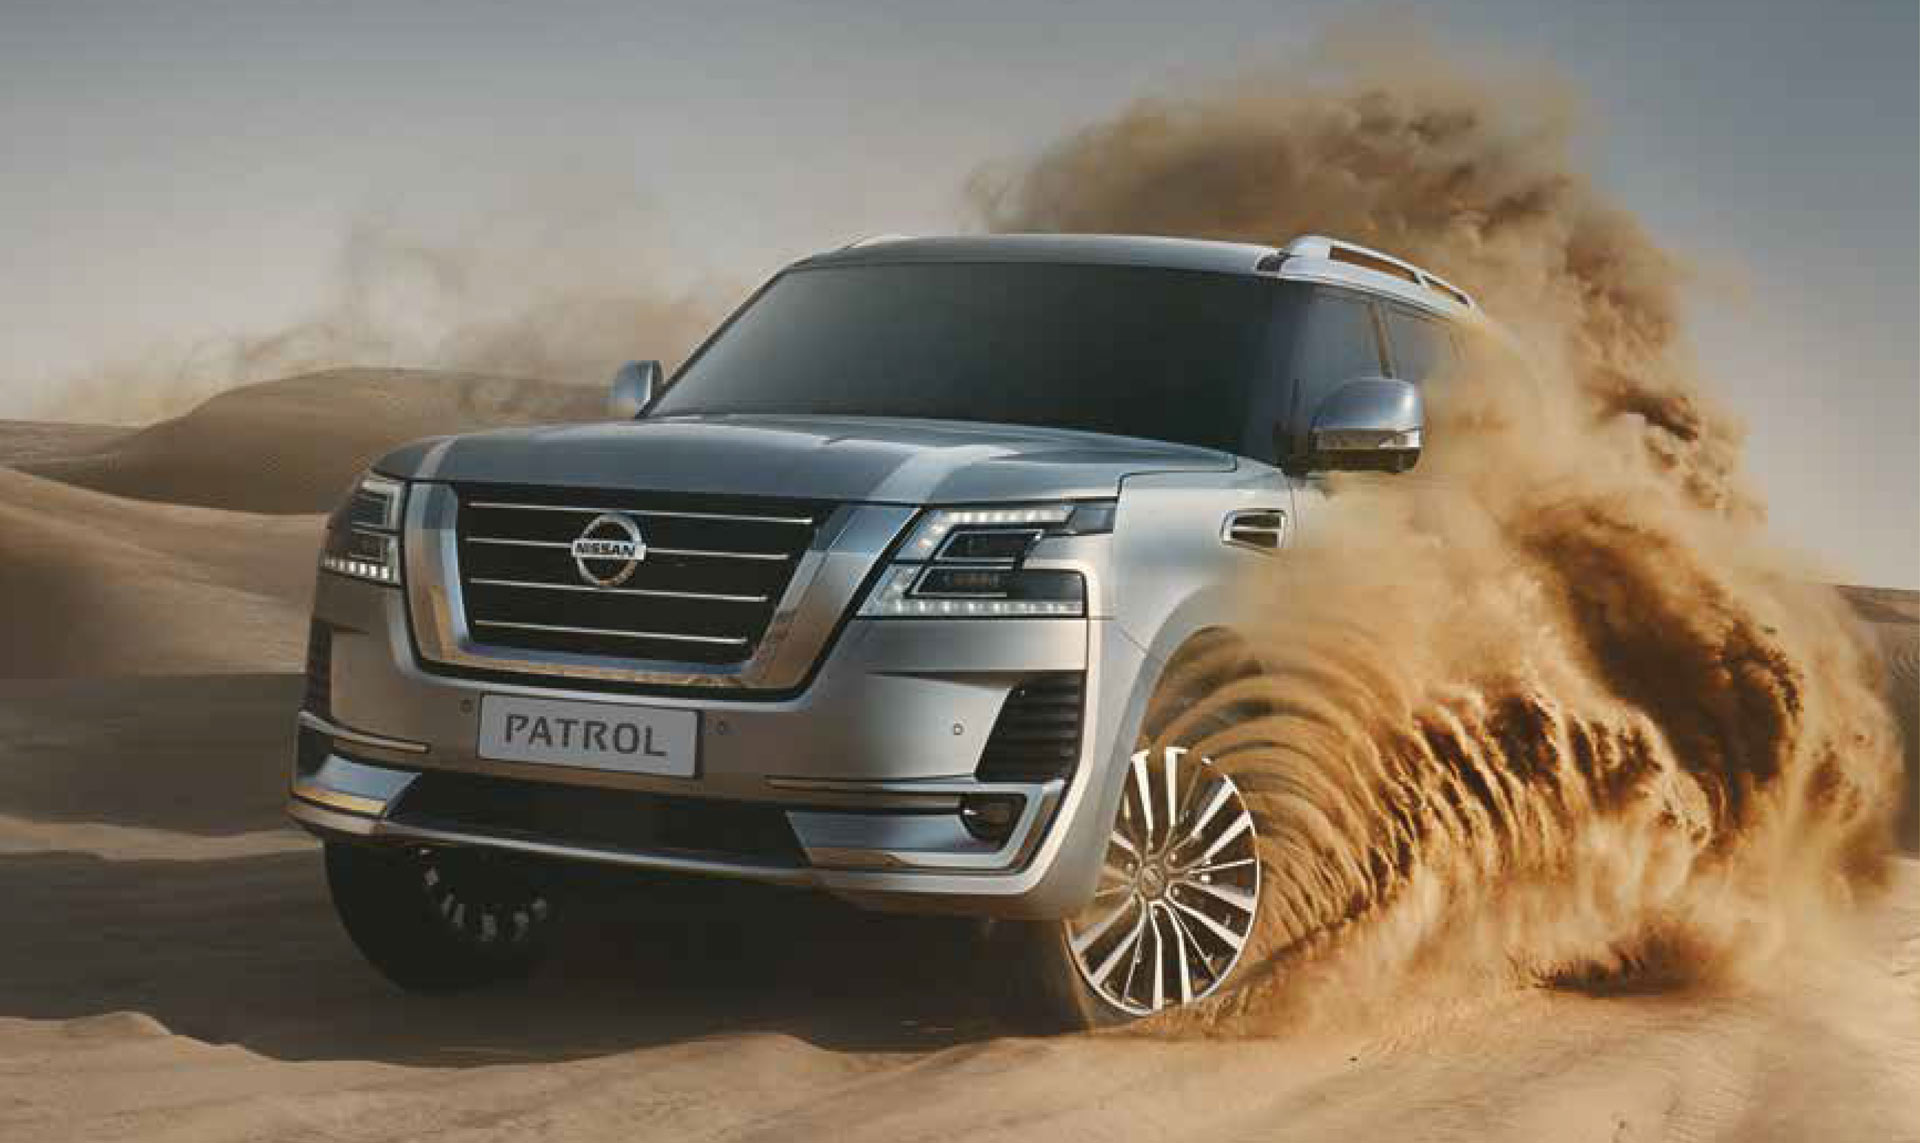 NISSAN PATROL LAUNCHED IN THE FIFTIES, STILL SHINING IN 2020